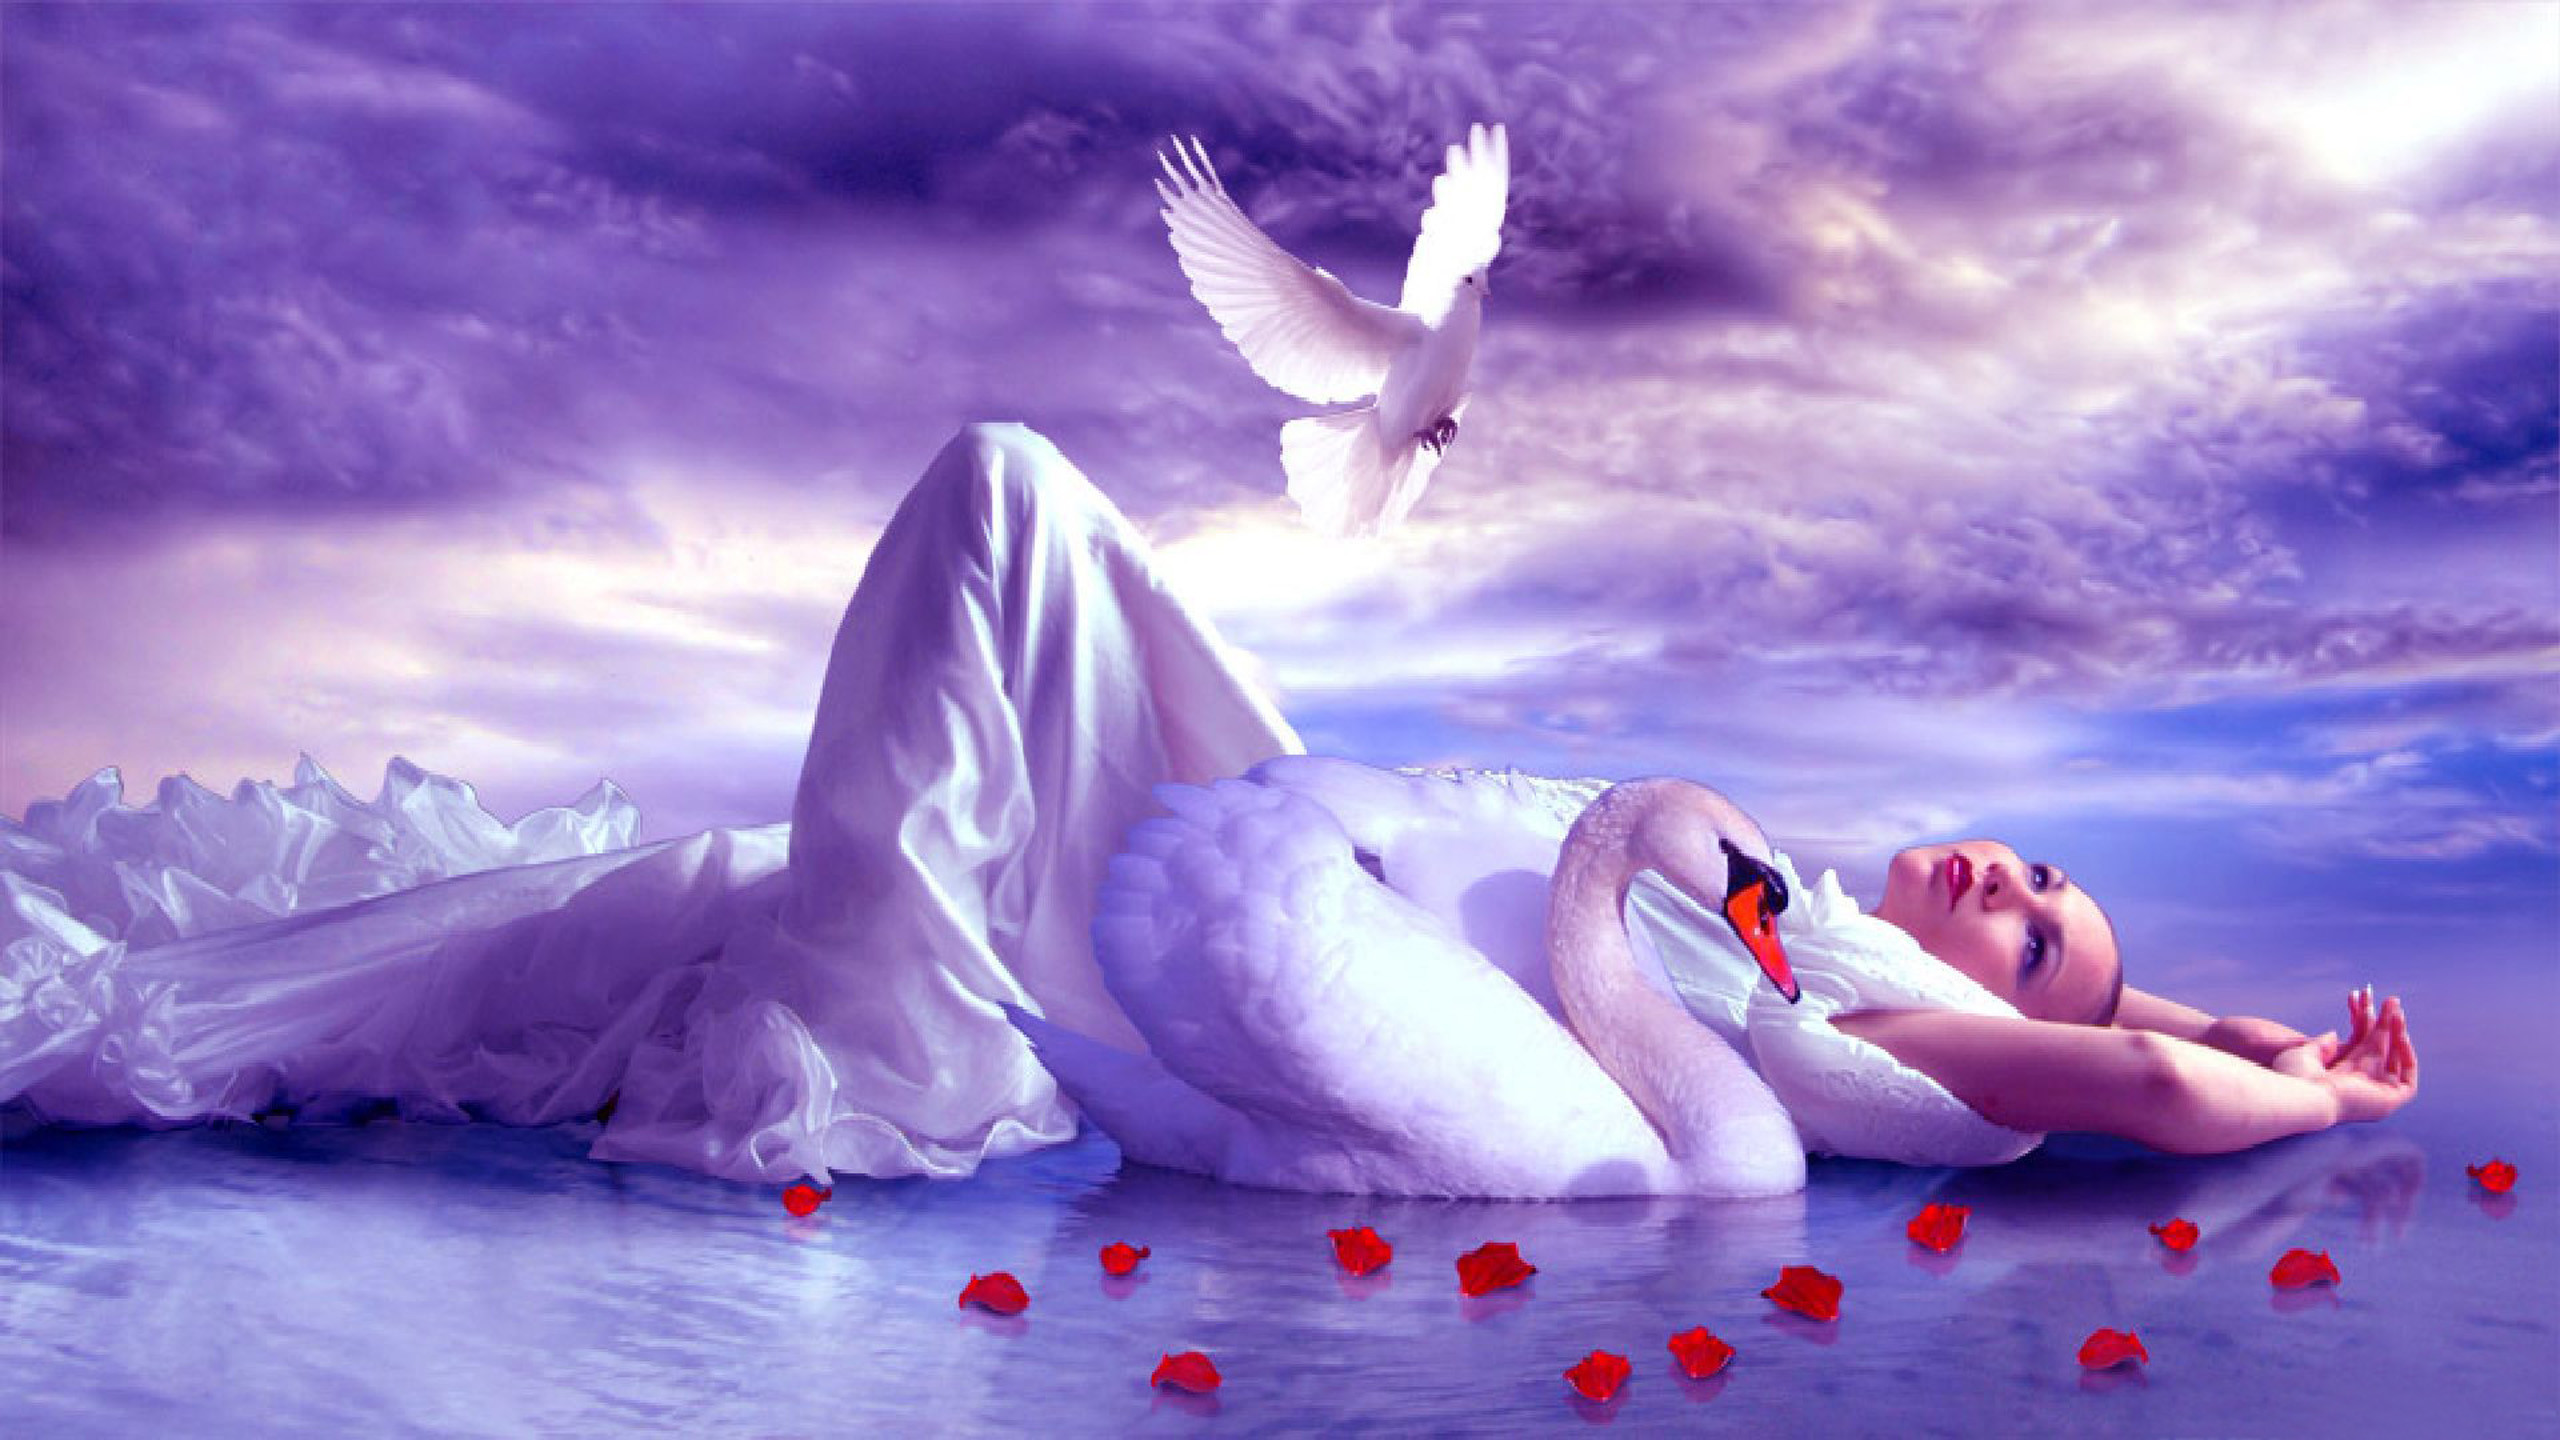 2560x1440 Girl Lake Accompaniment Of A Swan And Golub Sky With White Clouds Red Rose  Sheet Fantasy Hd Wallpaper : Wallpapers13.com